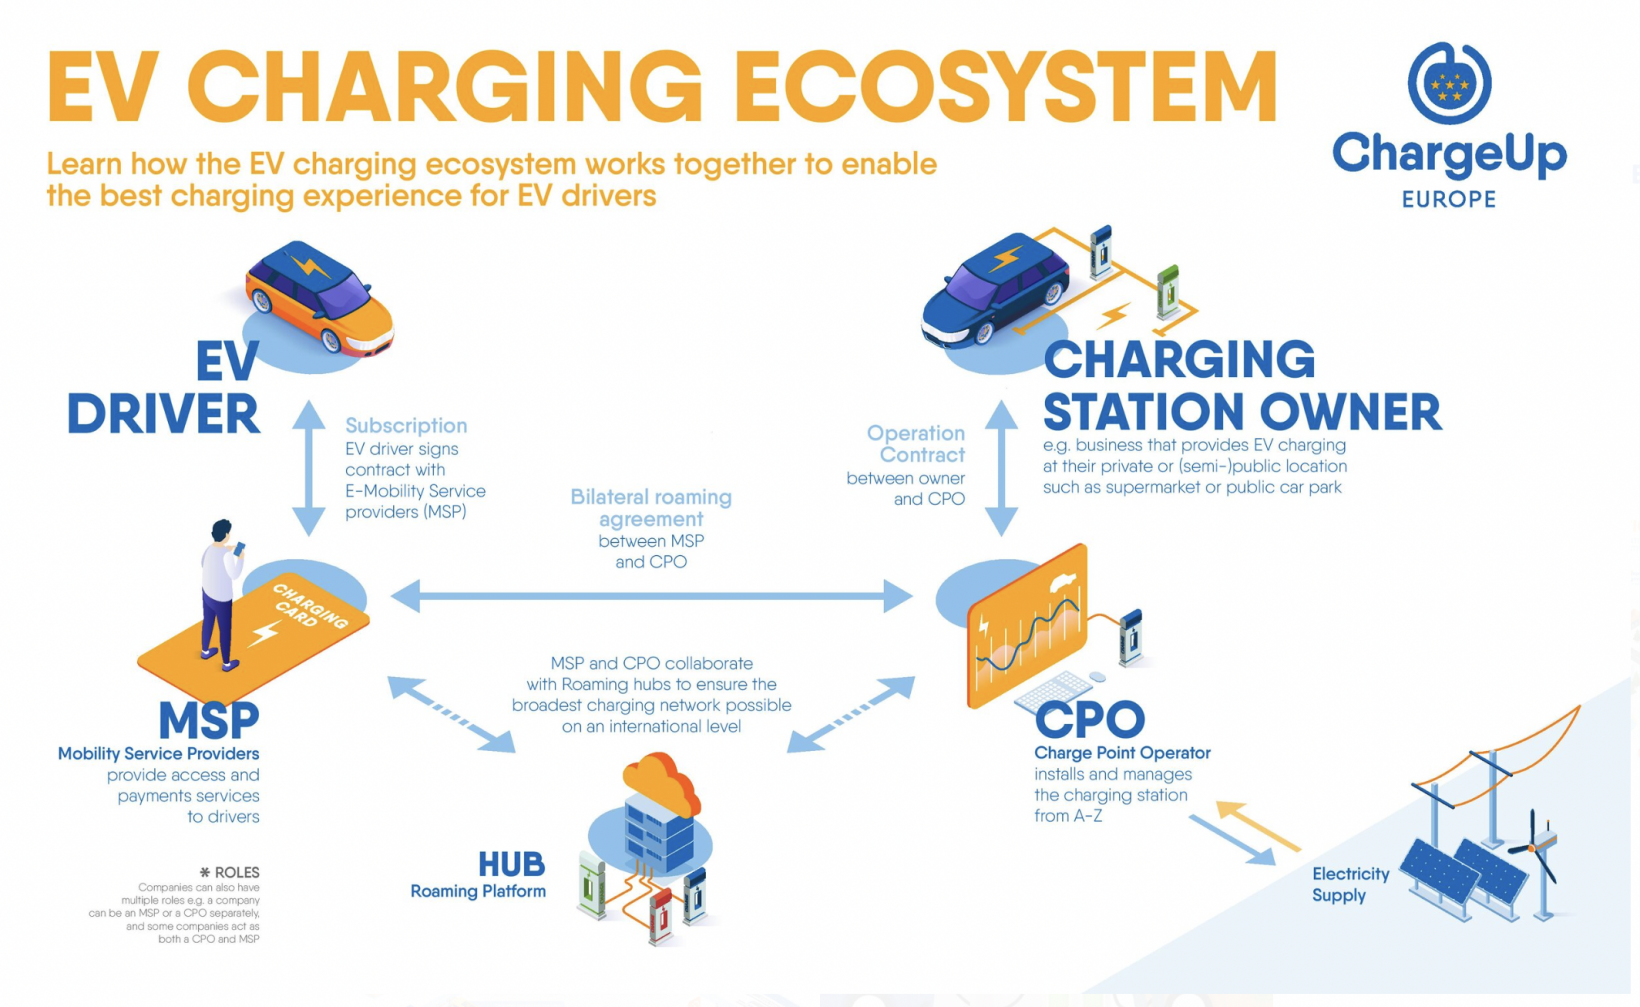 Image of the EV charging ecosystem